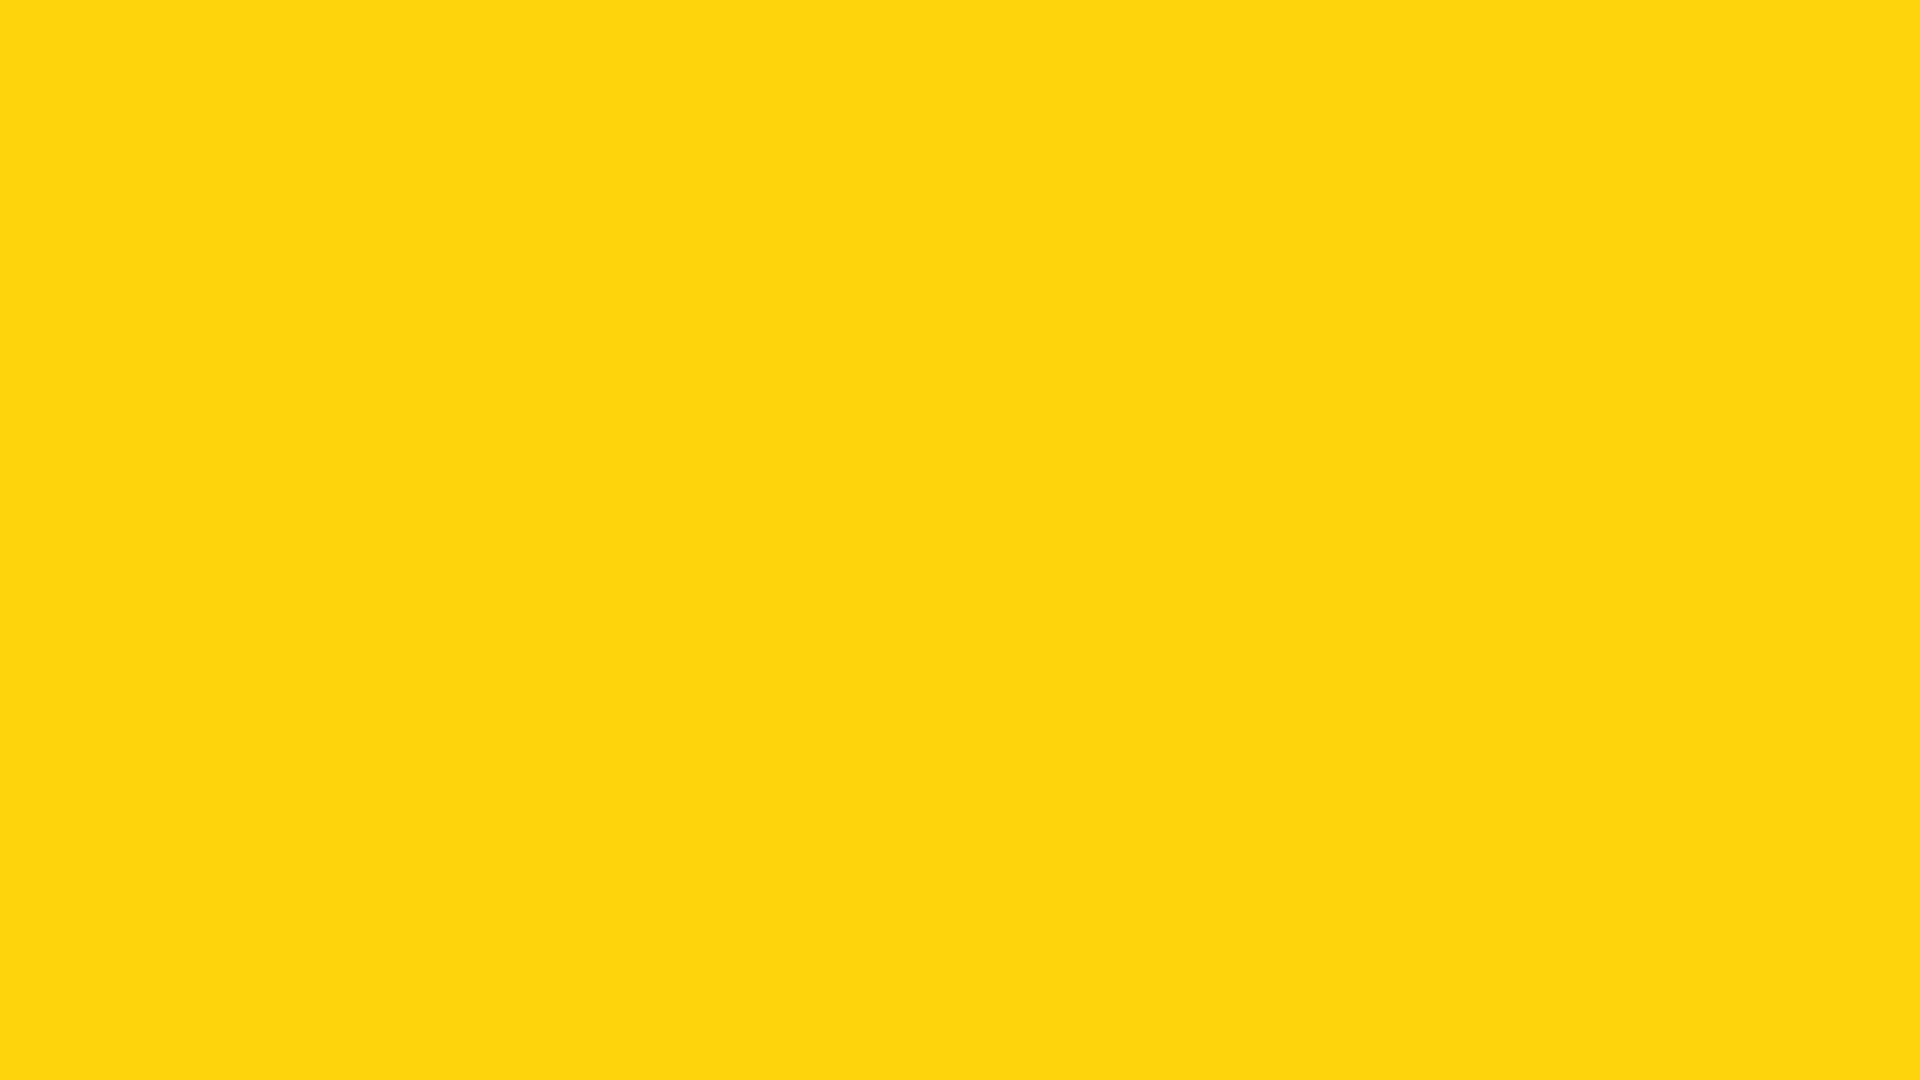 Plain Yellow Wallpaper For Desktop with image resolution 1920x1080 pixel. You can use this wallpaper as background for your desktop Computer Screensavers, Android or iPhone smartphones